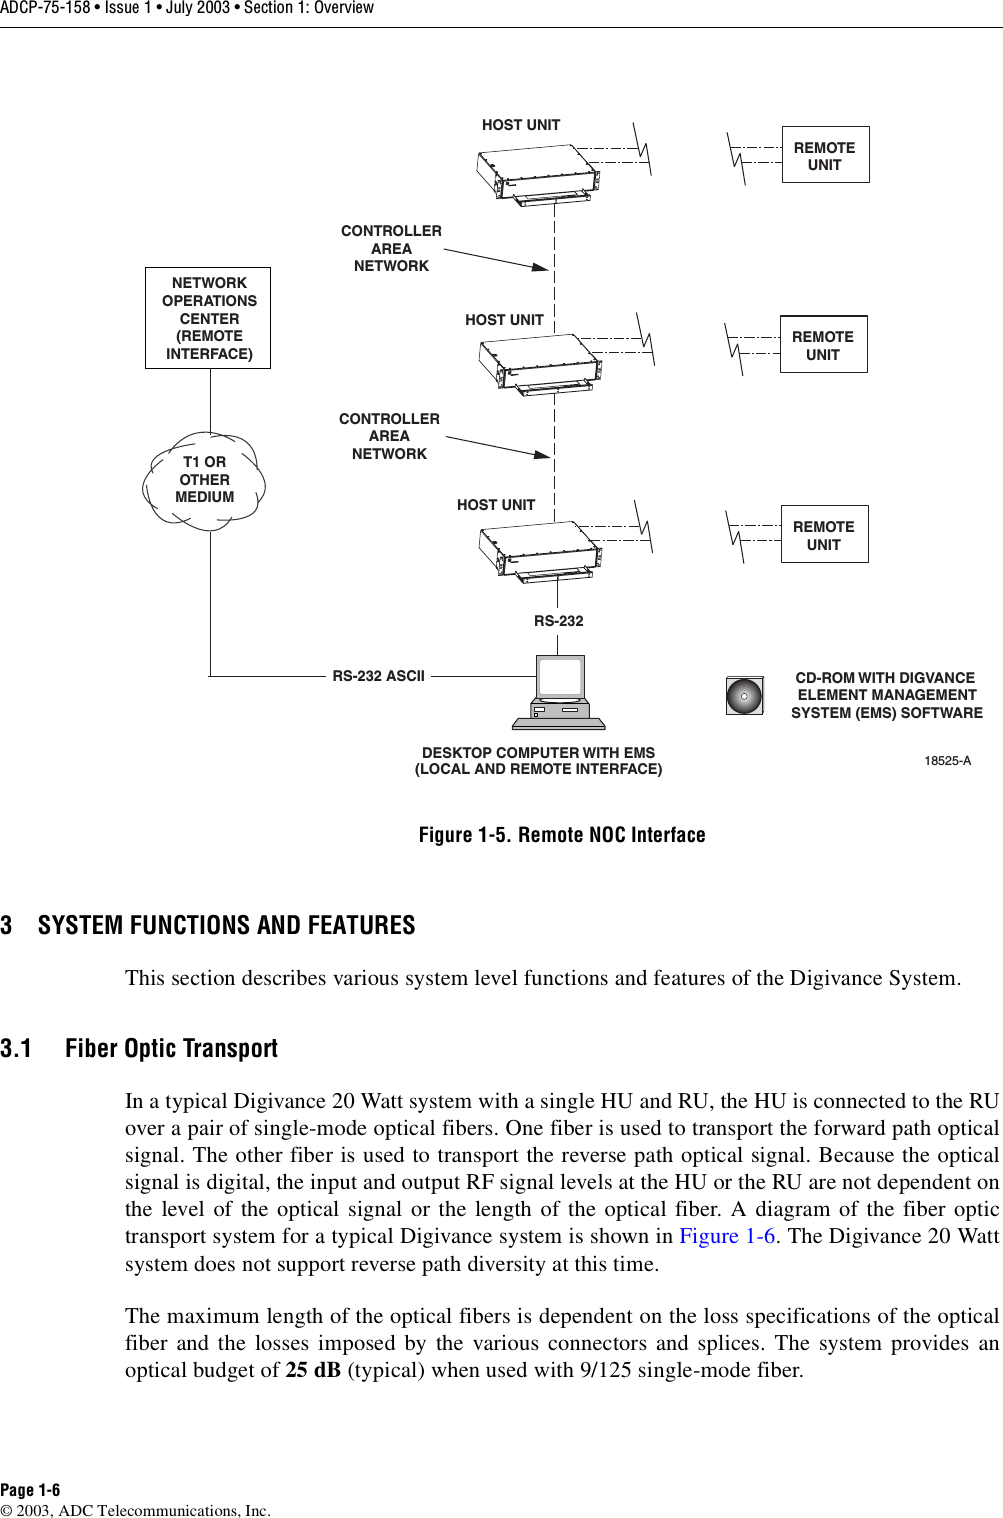 ADCP-75-158 • Issue 1 • July 2003 • Section 1: OverviewPage 1-6© 2003, ADC Telecommunications, Inc.Figure 1-5. Remote NOC Interface3 SYSTEM FUNCTIONS AND FEATURESThis section describes various system level functions and features of the Digivance System. 3.1 Fiber Optic TransportIn a typical Digivance 20 Watt system with a single HU and RU, the HU is connected to the RUover a pair of single-mode optical fibers. One fiber is used to transport the forward path opticalsignal. The other fiber is used to transport the reverse path optical signal. Because the opticalsignal is digital, the input and output RF signal levels at the HU or the RU are not dependent onthe level of the optical signal or the length of the optical fiber. A diagram of the fiber optictransport system for a typical Digivance system is shown in Figure 1-6. The Digivance 20 Wattsystem does not support reverse path diversity at this time. The maximum length of the optical fibers is dependent on the loss specifications of the opticalfiber and the losses imposed by the various connectors and splices. The system provides anoptical budget of 25 dB (typical) when used with 9/125 single-mode fiber. DESKTOP COMPUTER WITH EMS(LOCAL AND REMOTE INTERFACE)HOST UNITHOST UNITHOST UNITNETWORKOPERATIONSCENTER(REMOTEINTERFACE)T1 OROTHERMEDIUMCONTROLLERAREANETWORKCONTROLLERAREANETWORKRS-232 ASCIIRS-23218525-ACD-ROM WITH DIGVANCE ELEMENT MANAGEMENTSYSTEM (EMS) SOFTWAREREMOTEUNITREMOTEUNITREMOTEUNIT